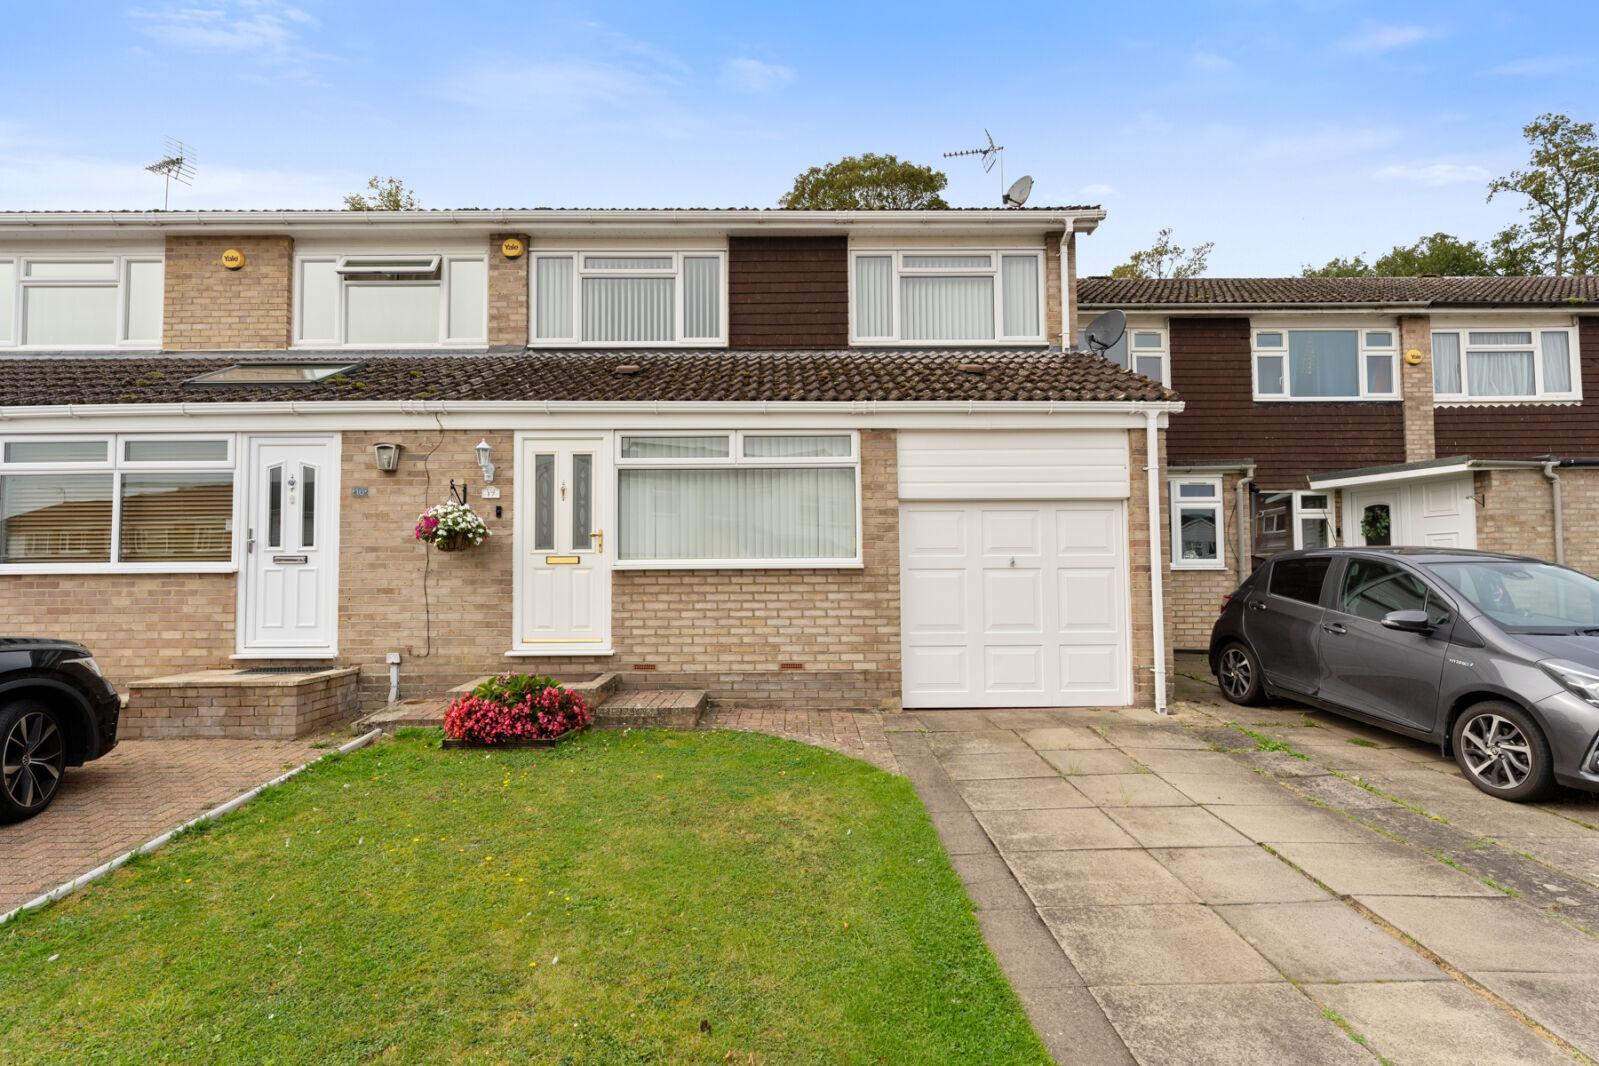 3 bedroom mid terraced house for sale Gilbey Crescent, Stansted, CM24, main image